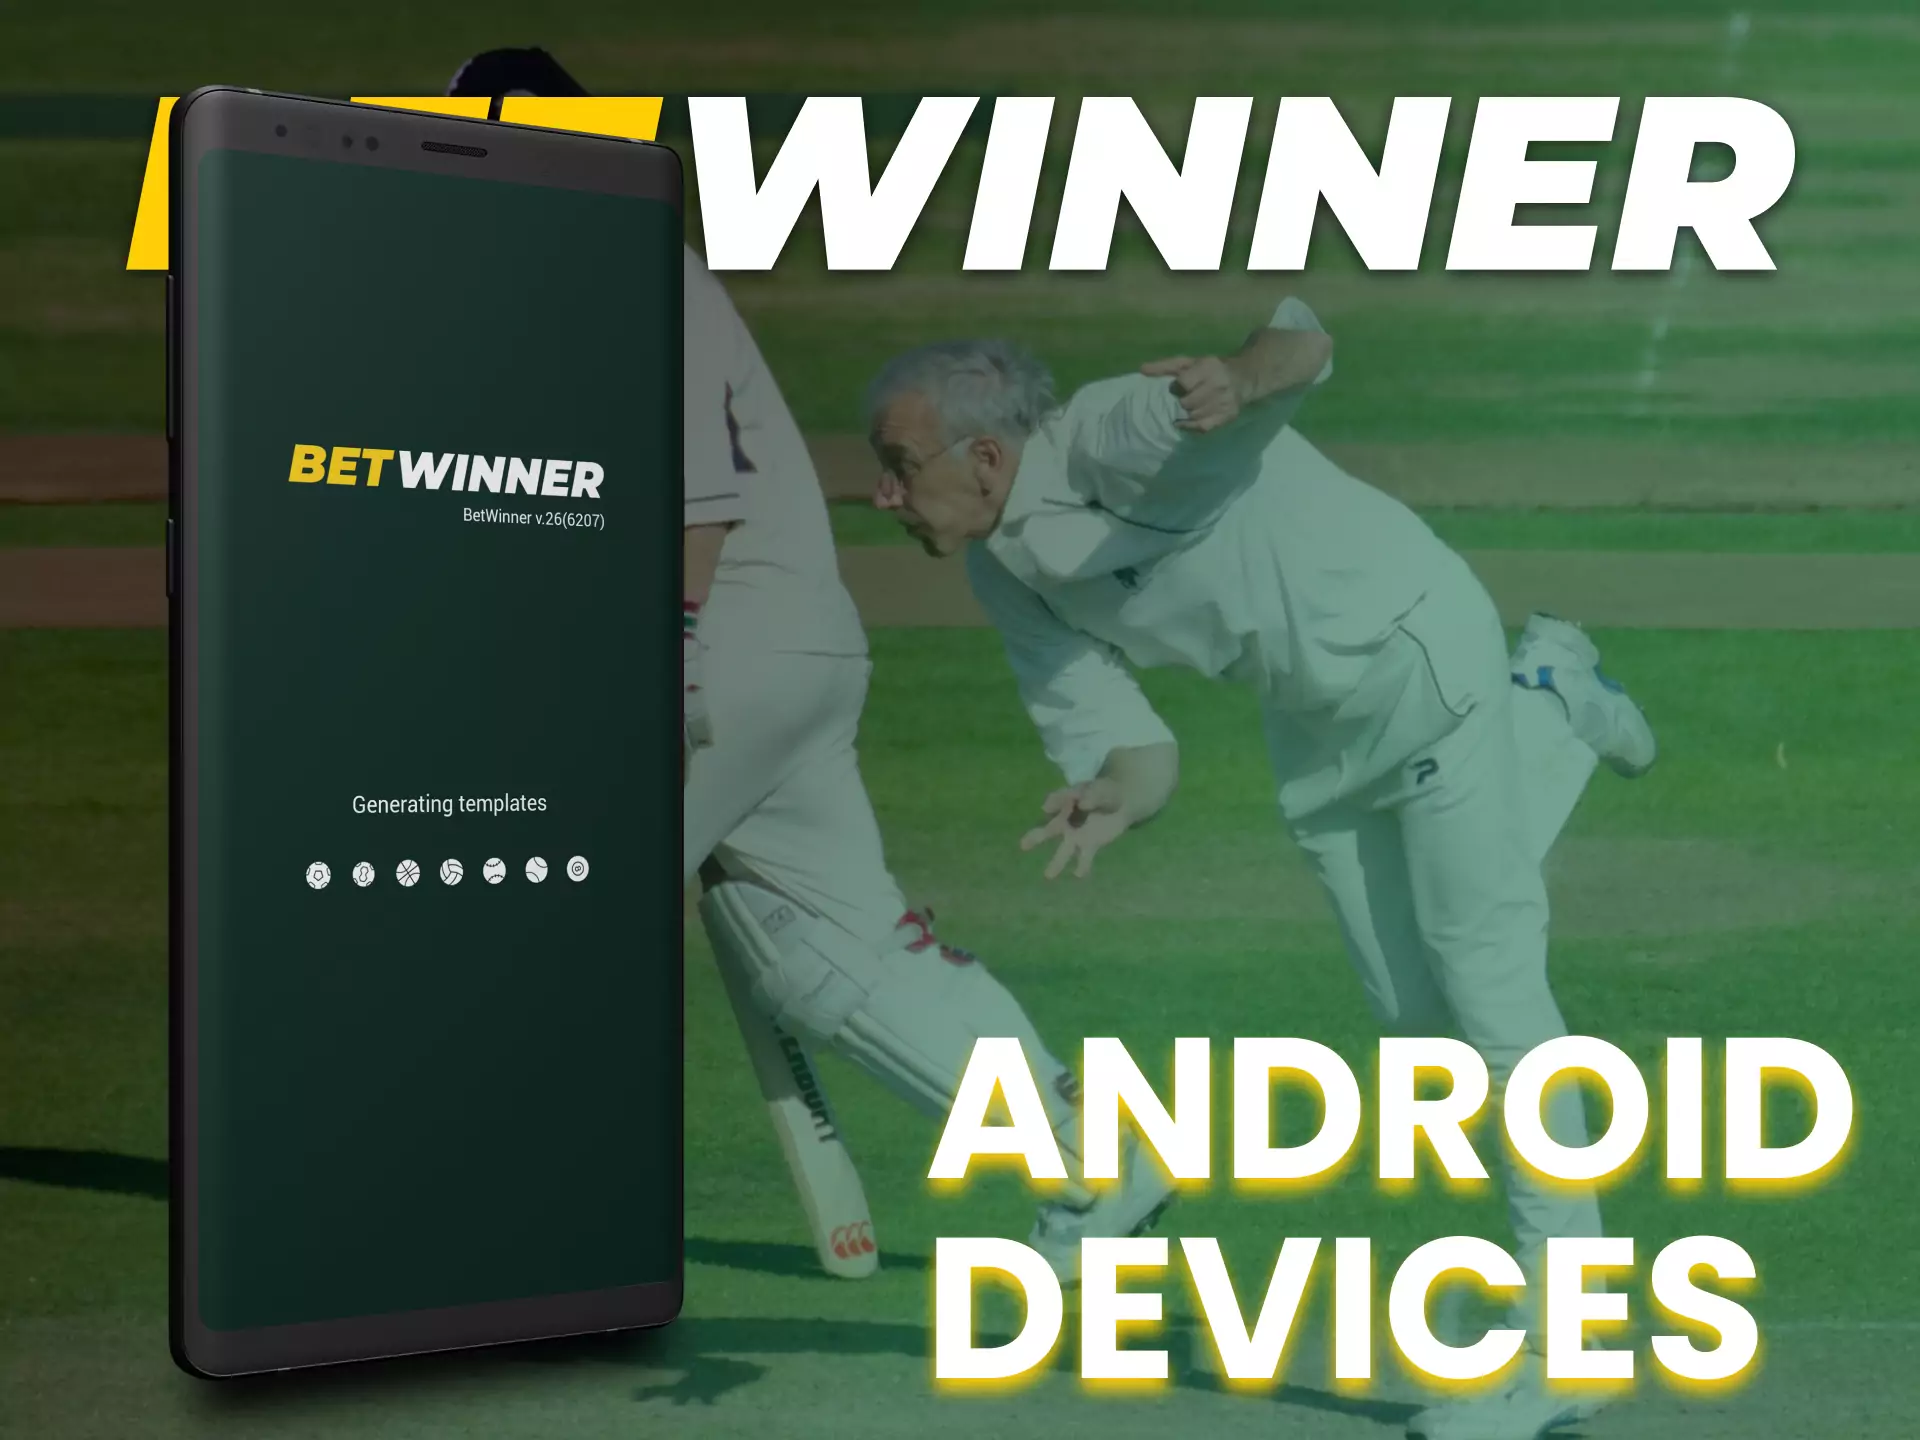 The Betwinner app is supported on many Android devices.